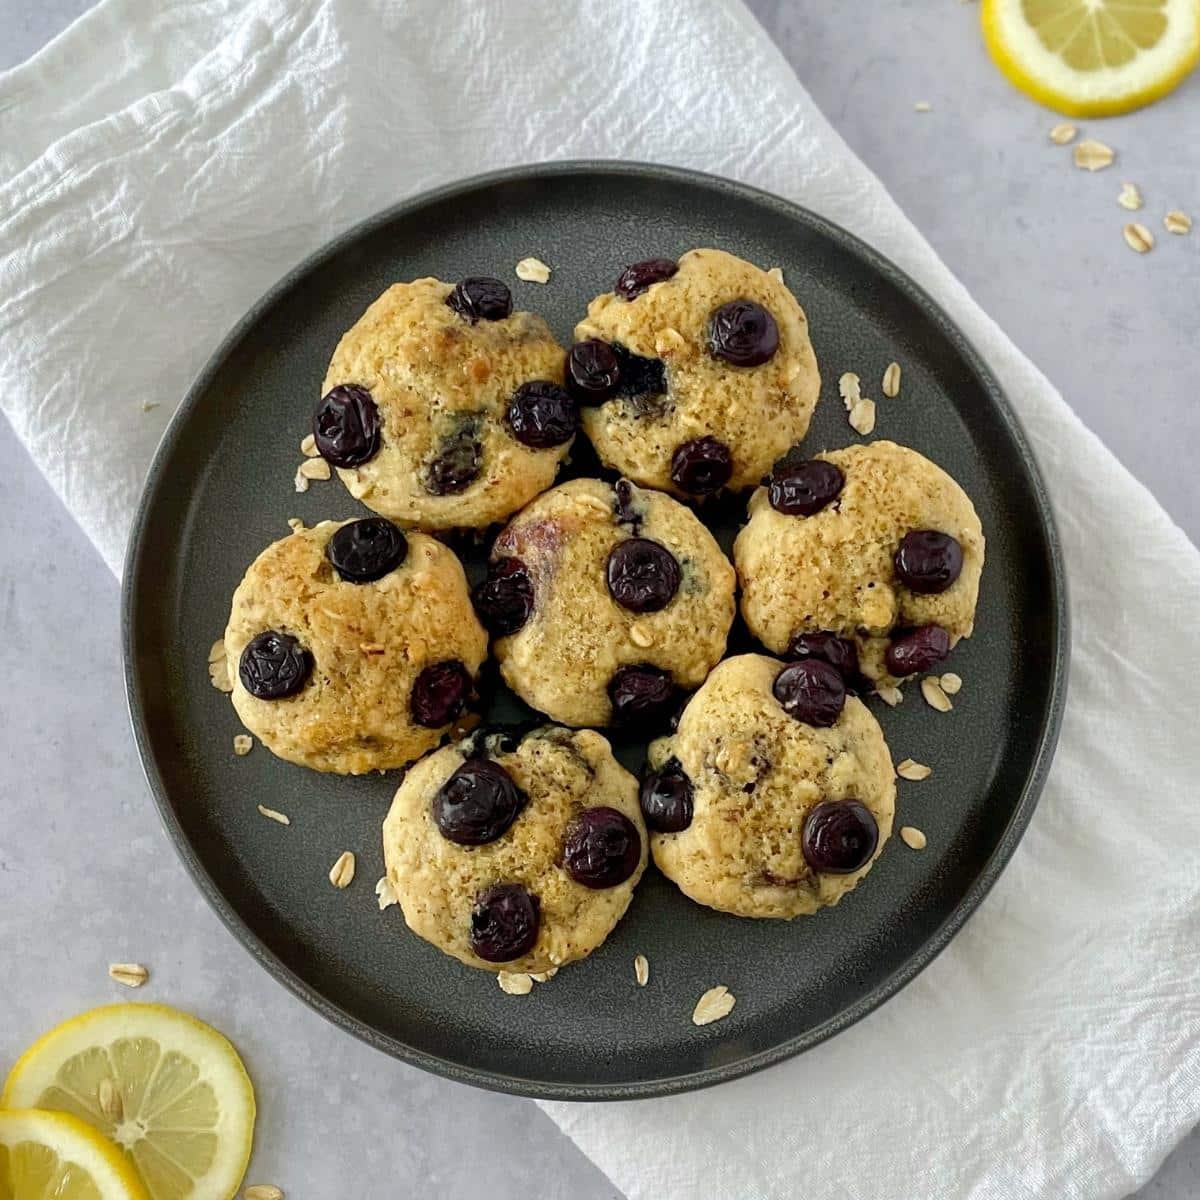 Plate of lemon blueberry muffins over a napkin with lemon slices on the side.